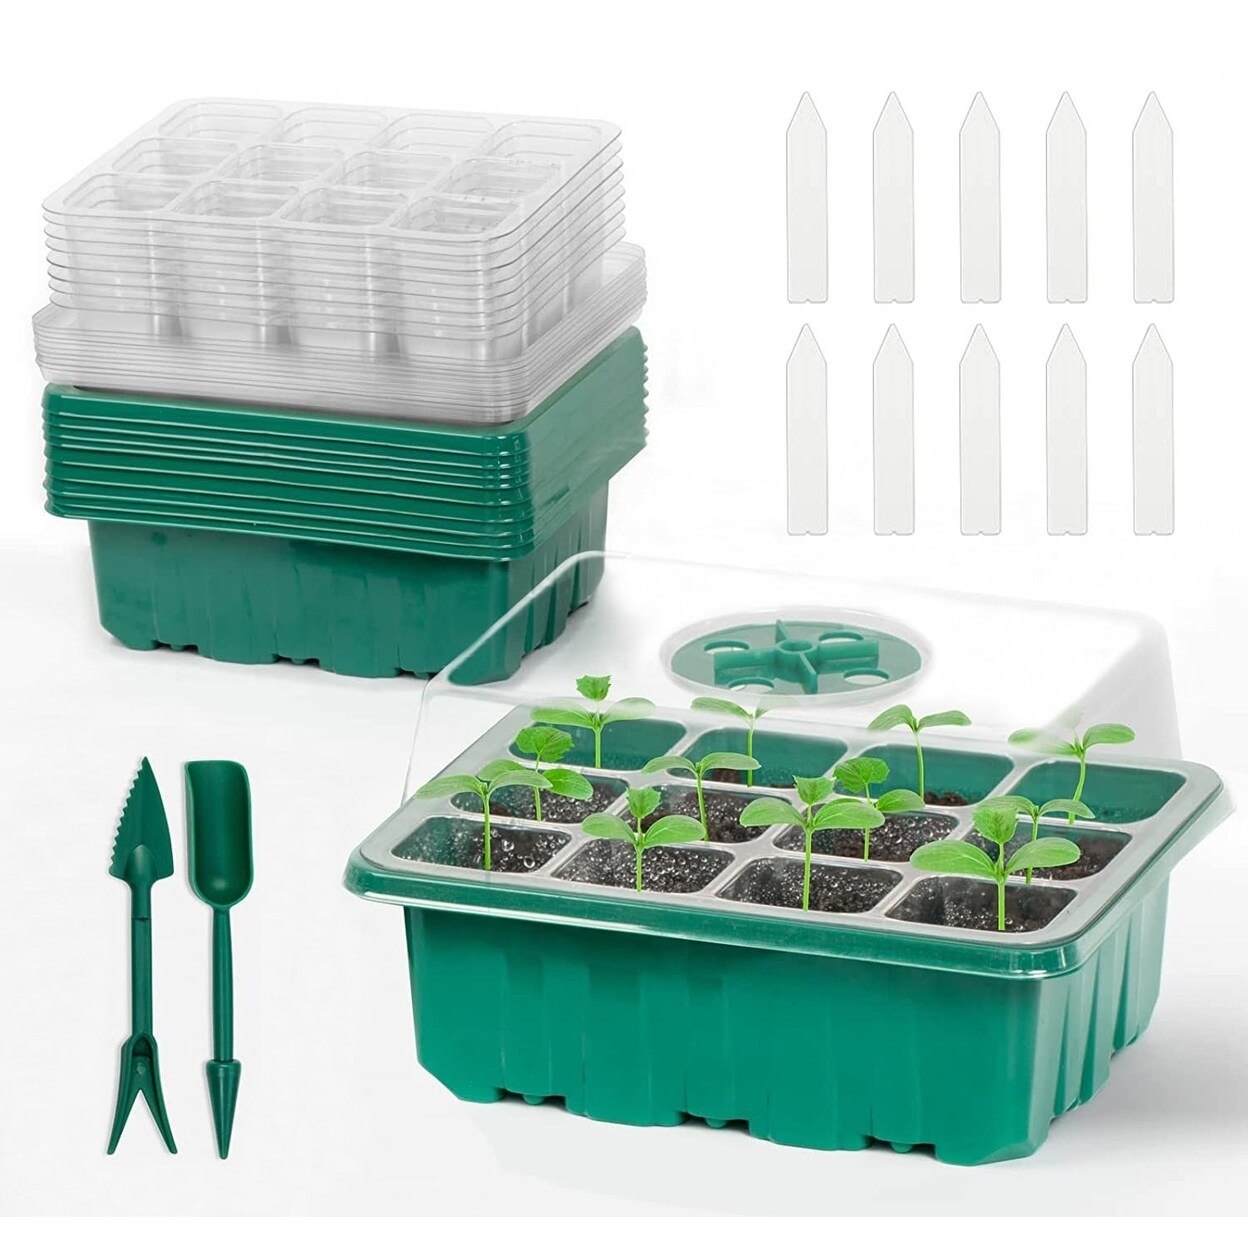 SKUSHOPS 10Pcs Seed Starter Tray Kit Reusable Overall 120Cells Seeding Propagator Station Greenhouse Growing Germination Tray